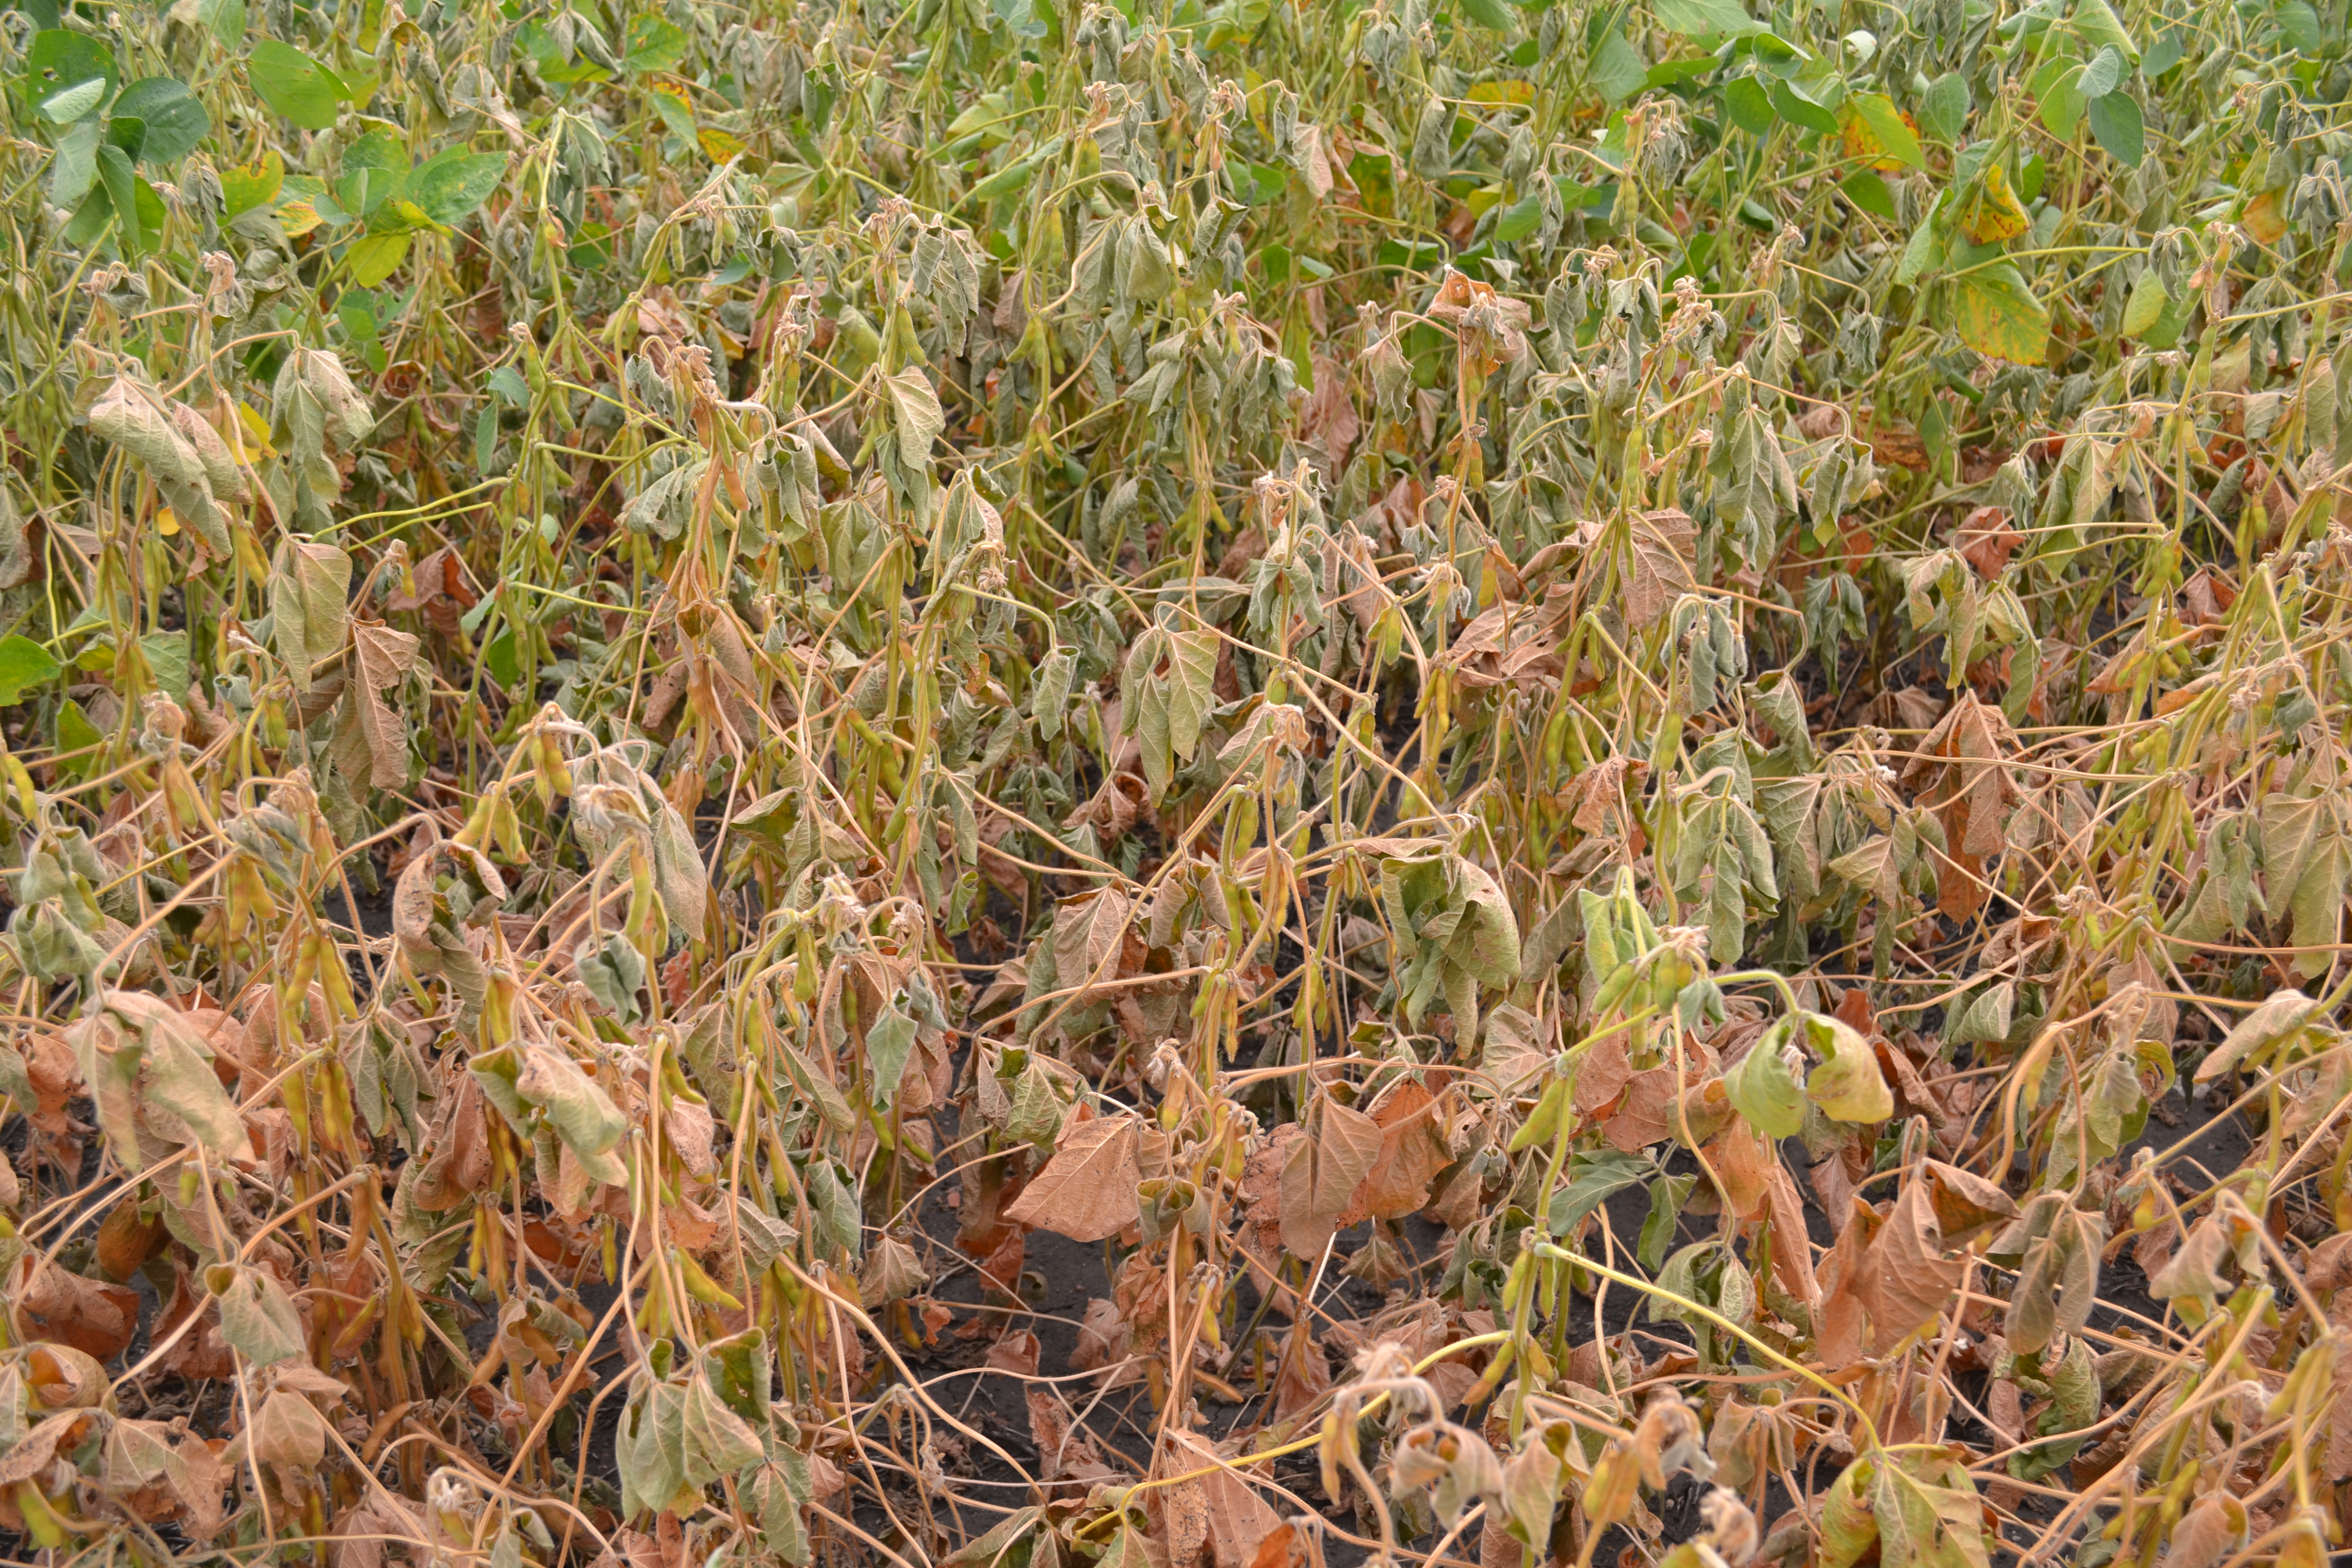 Soybean plants with wilted leaves many have turned tan or brown.